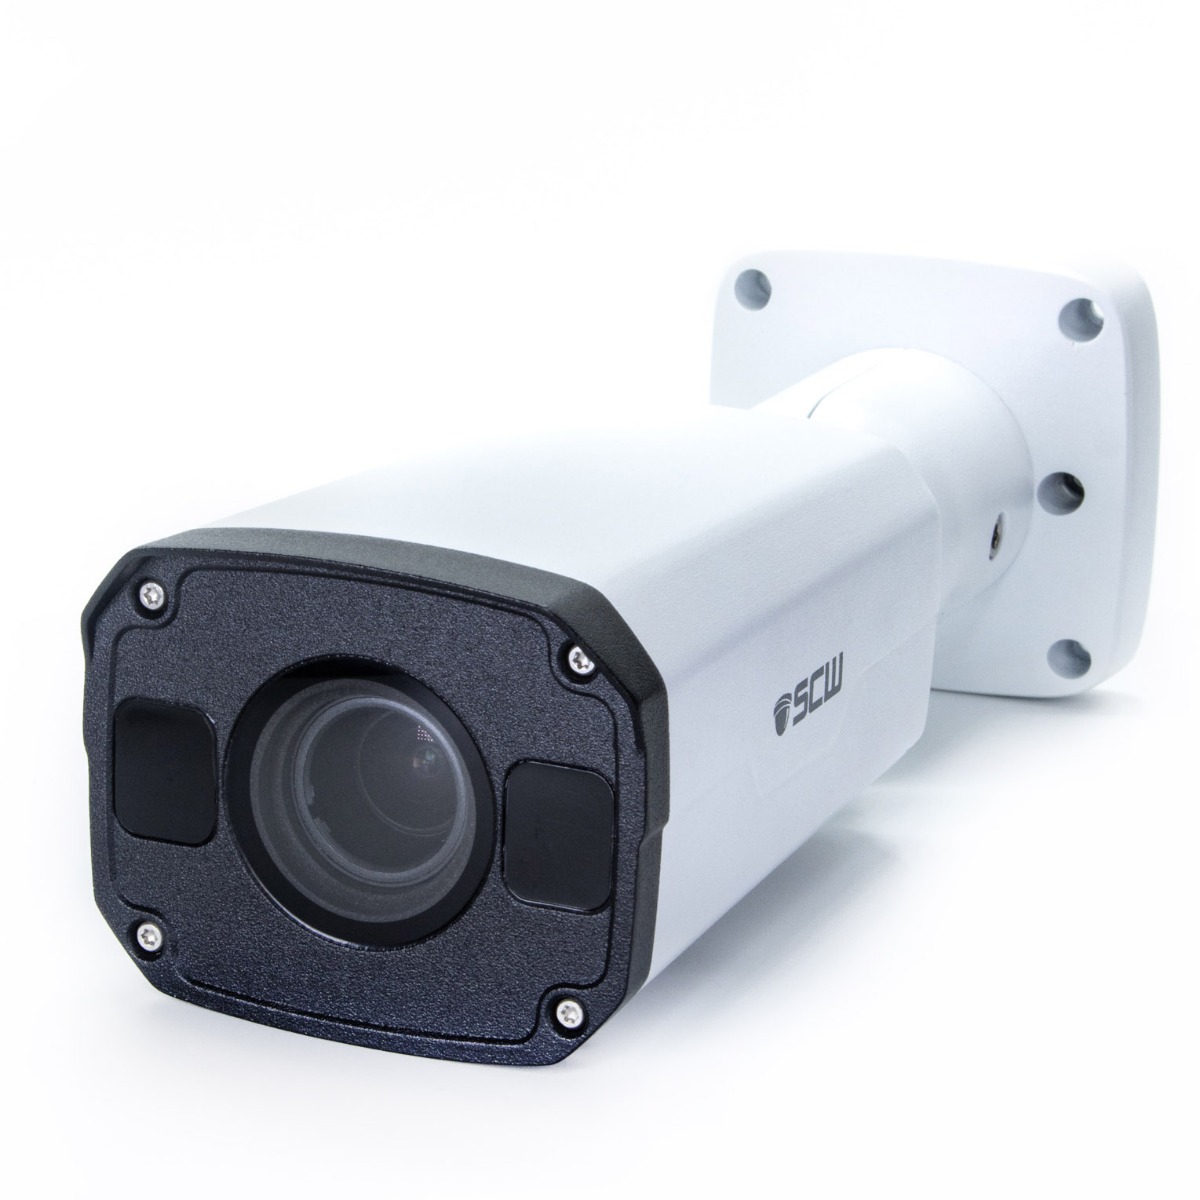 The Viking 8.0 - 26BV8M-A - 8MP (4x1080P) Multi-Purpose Lens Bullet Camera with Motorized Zoom and Focus